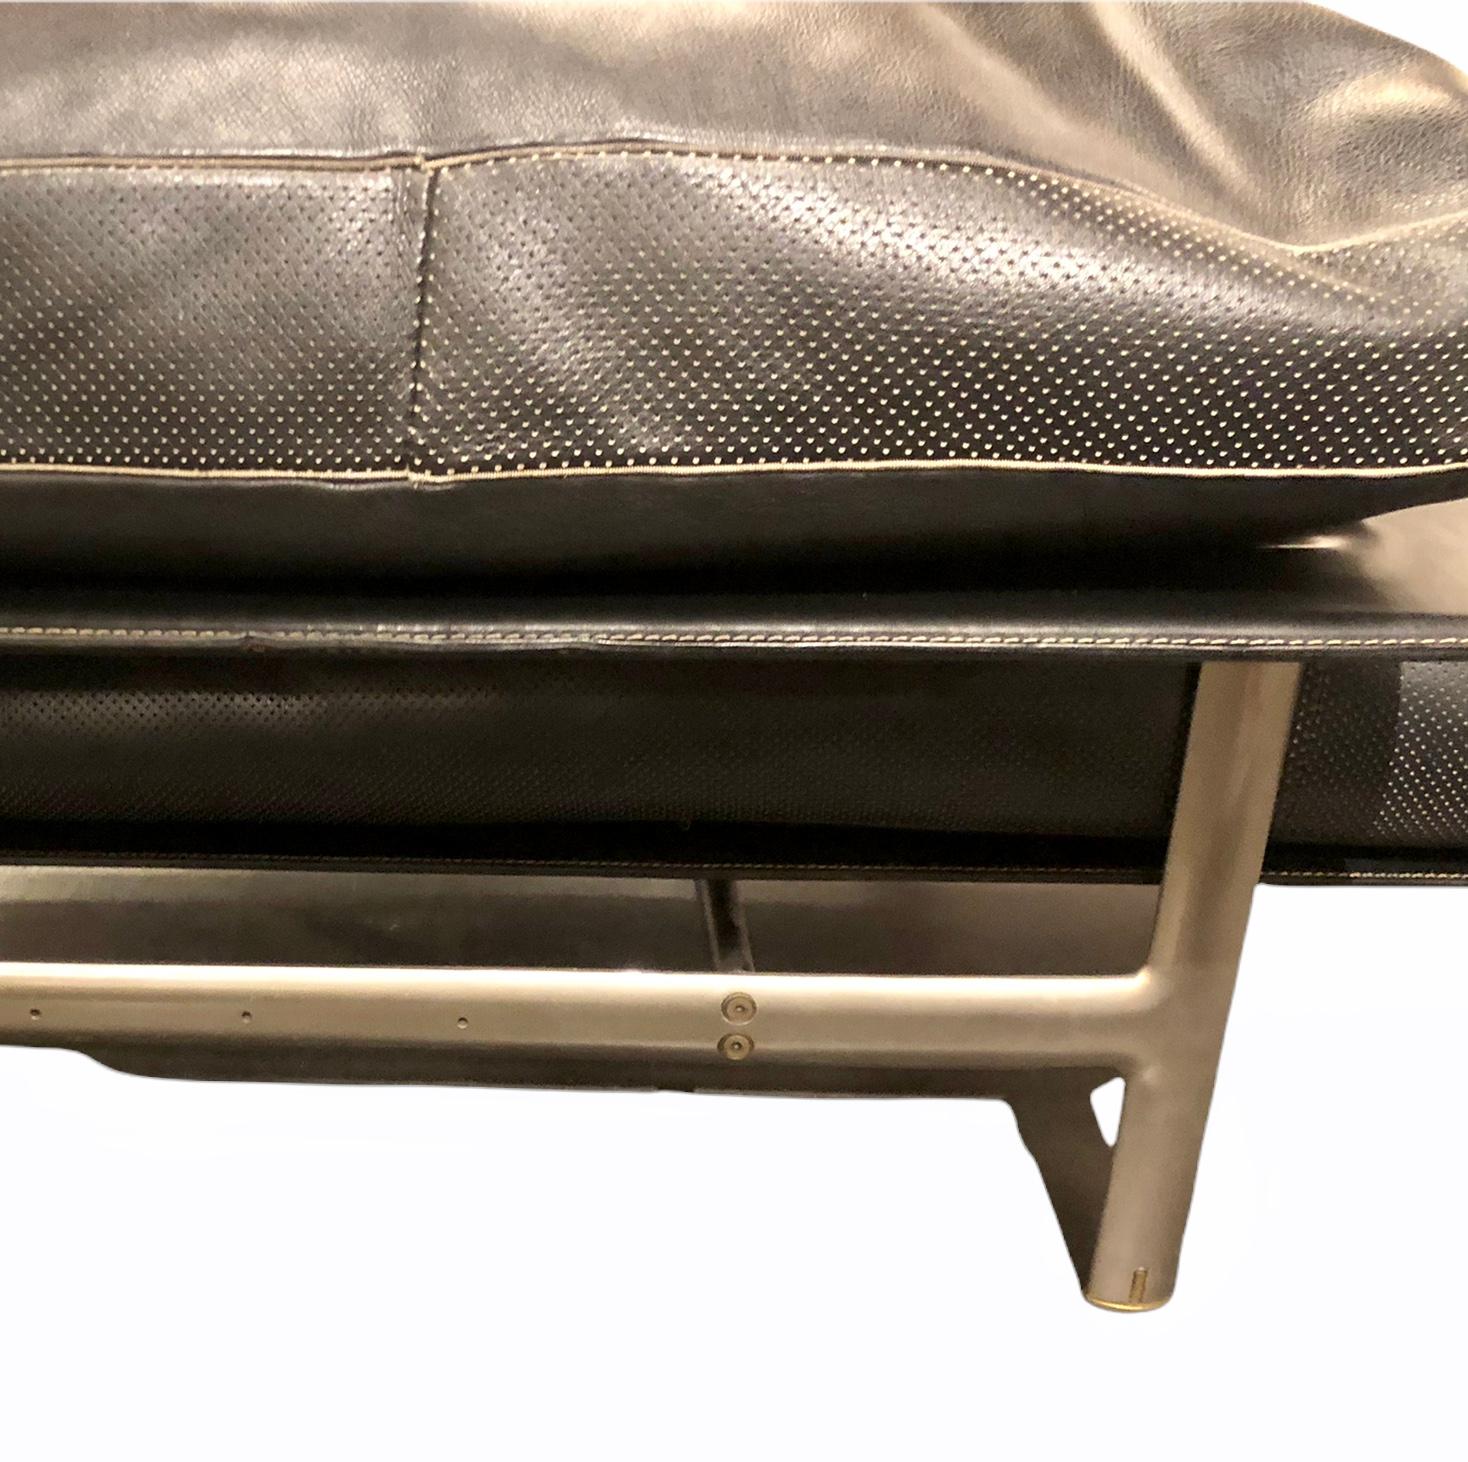 Futurist Leather  Lounge Chair diesis by Citterio for BB italia